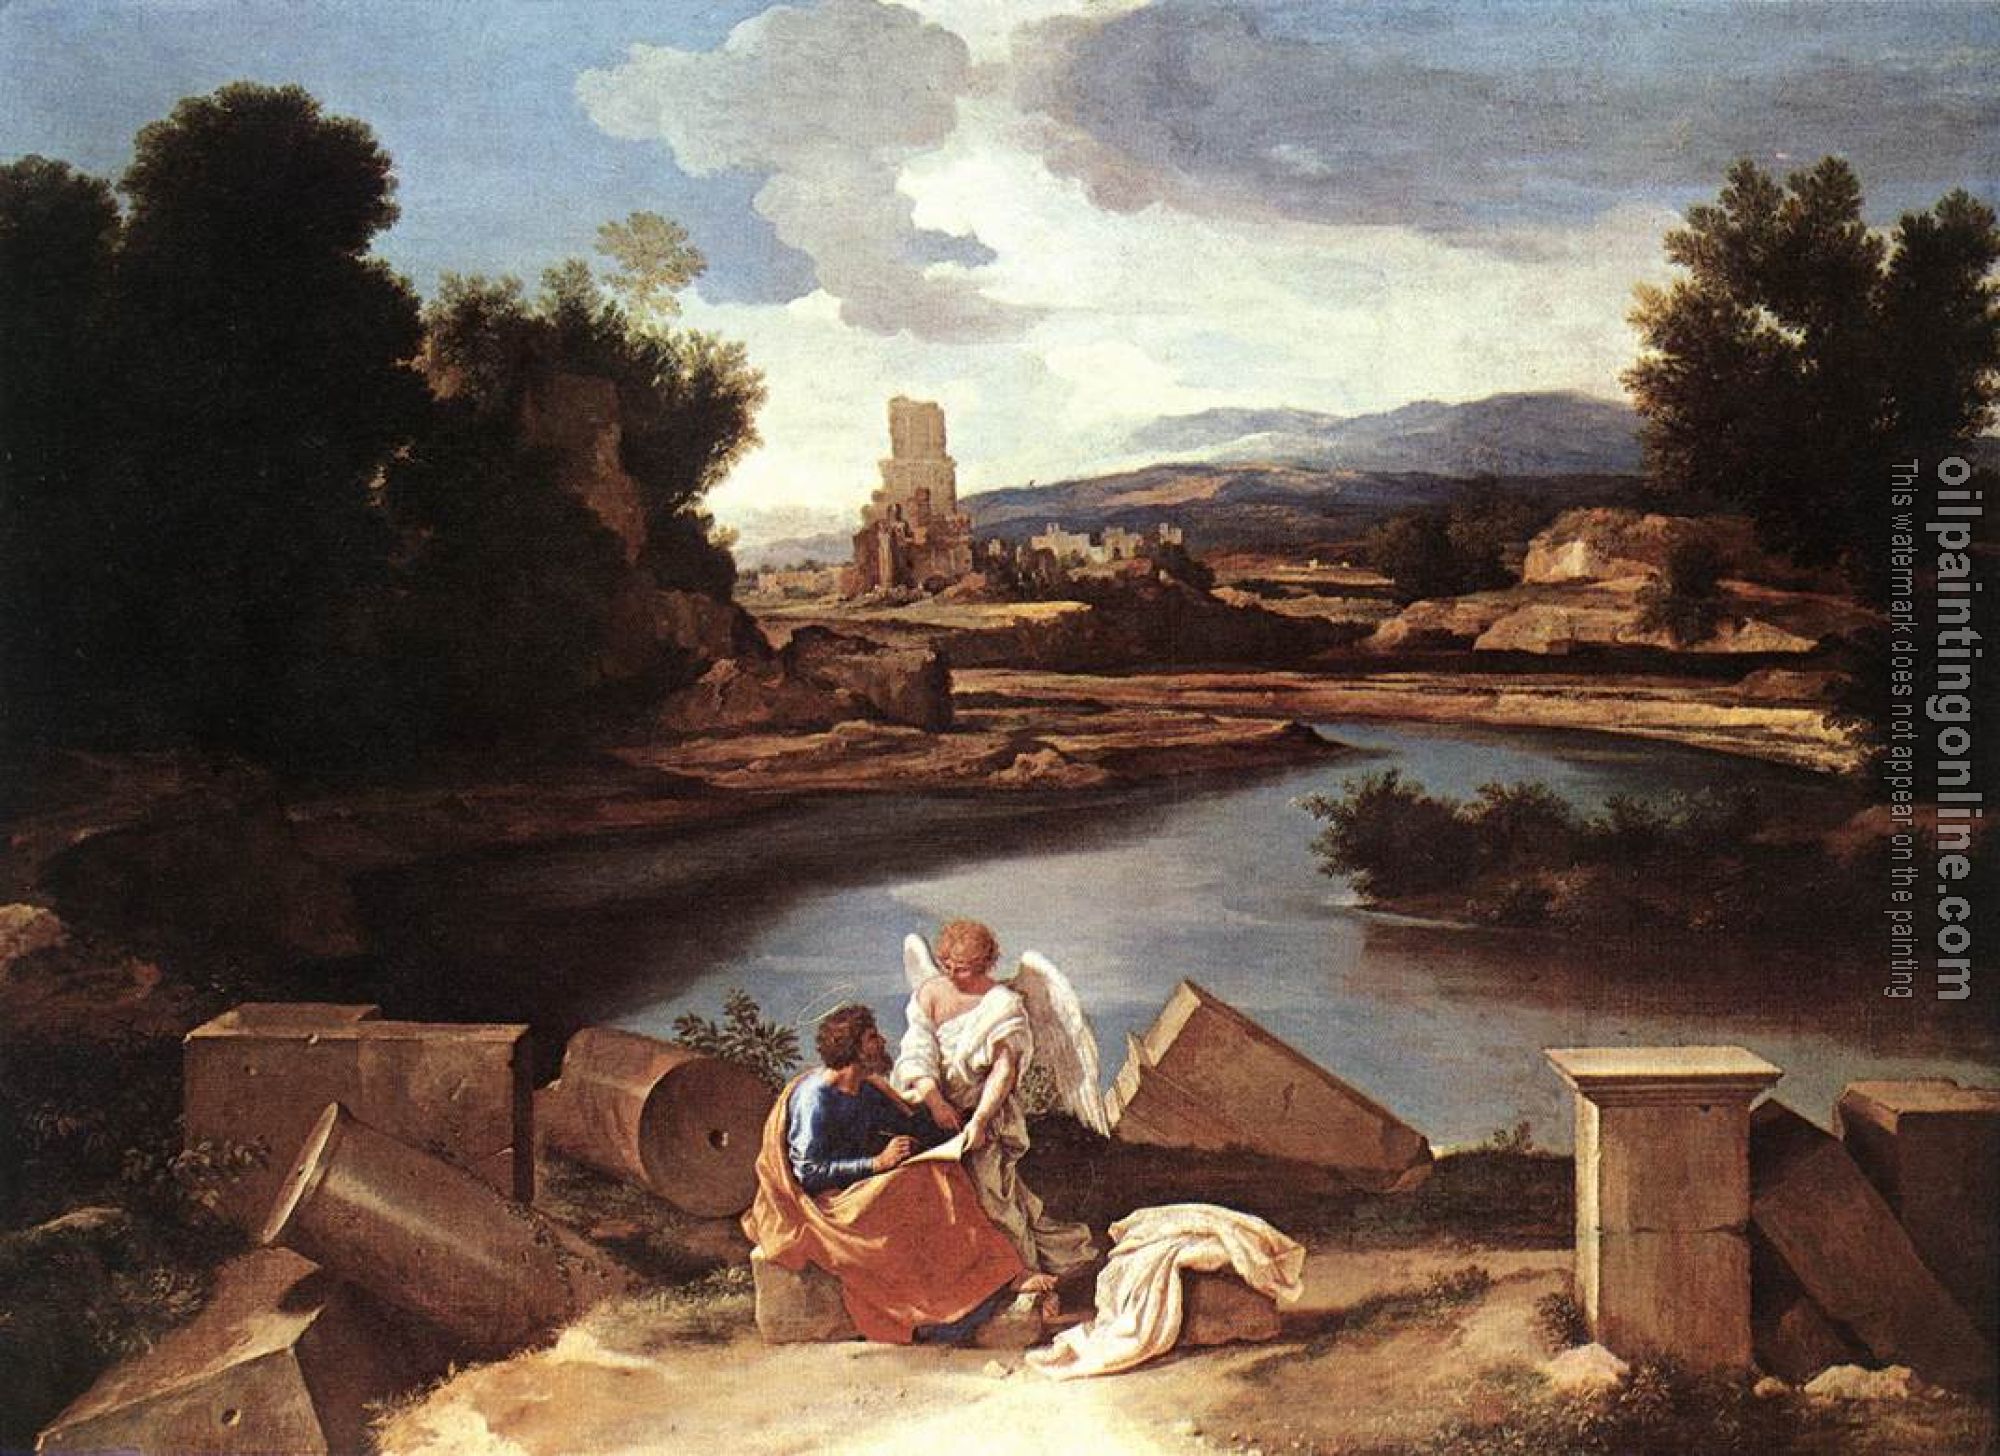 Poussin, Nicolas - St Matthew and the angel